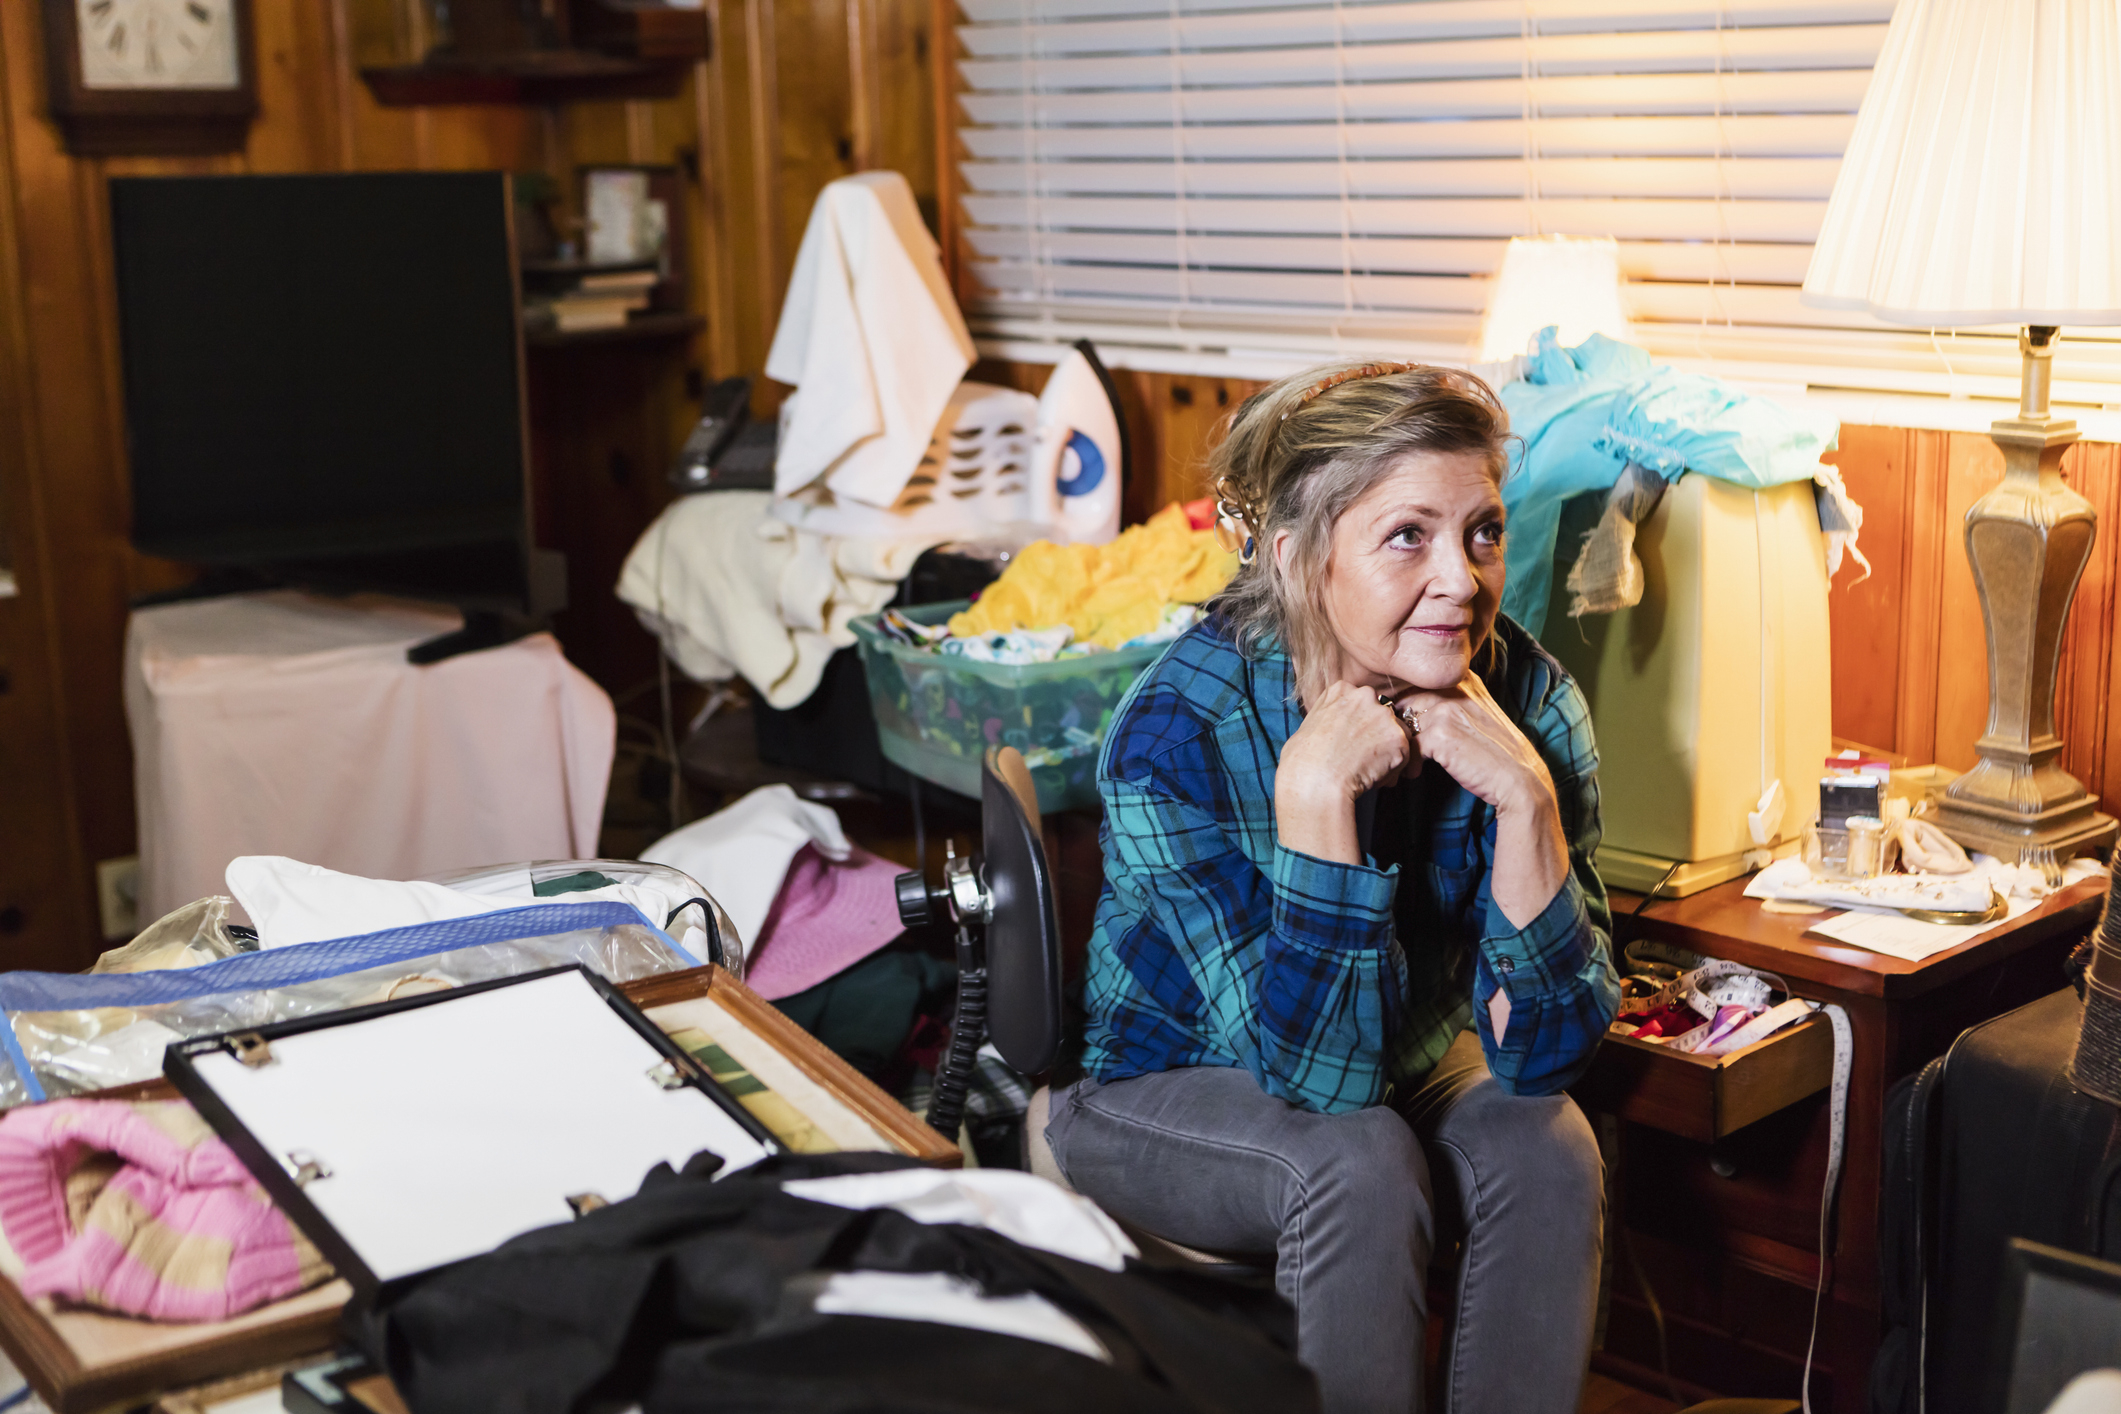 Woman sitting amidst a cluttered room, looking pensive, surrounded by laundry and miscellaneous items